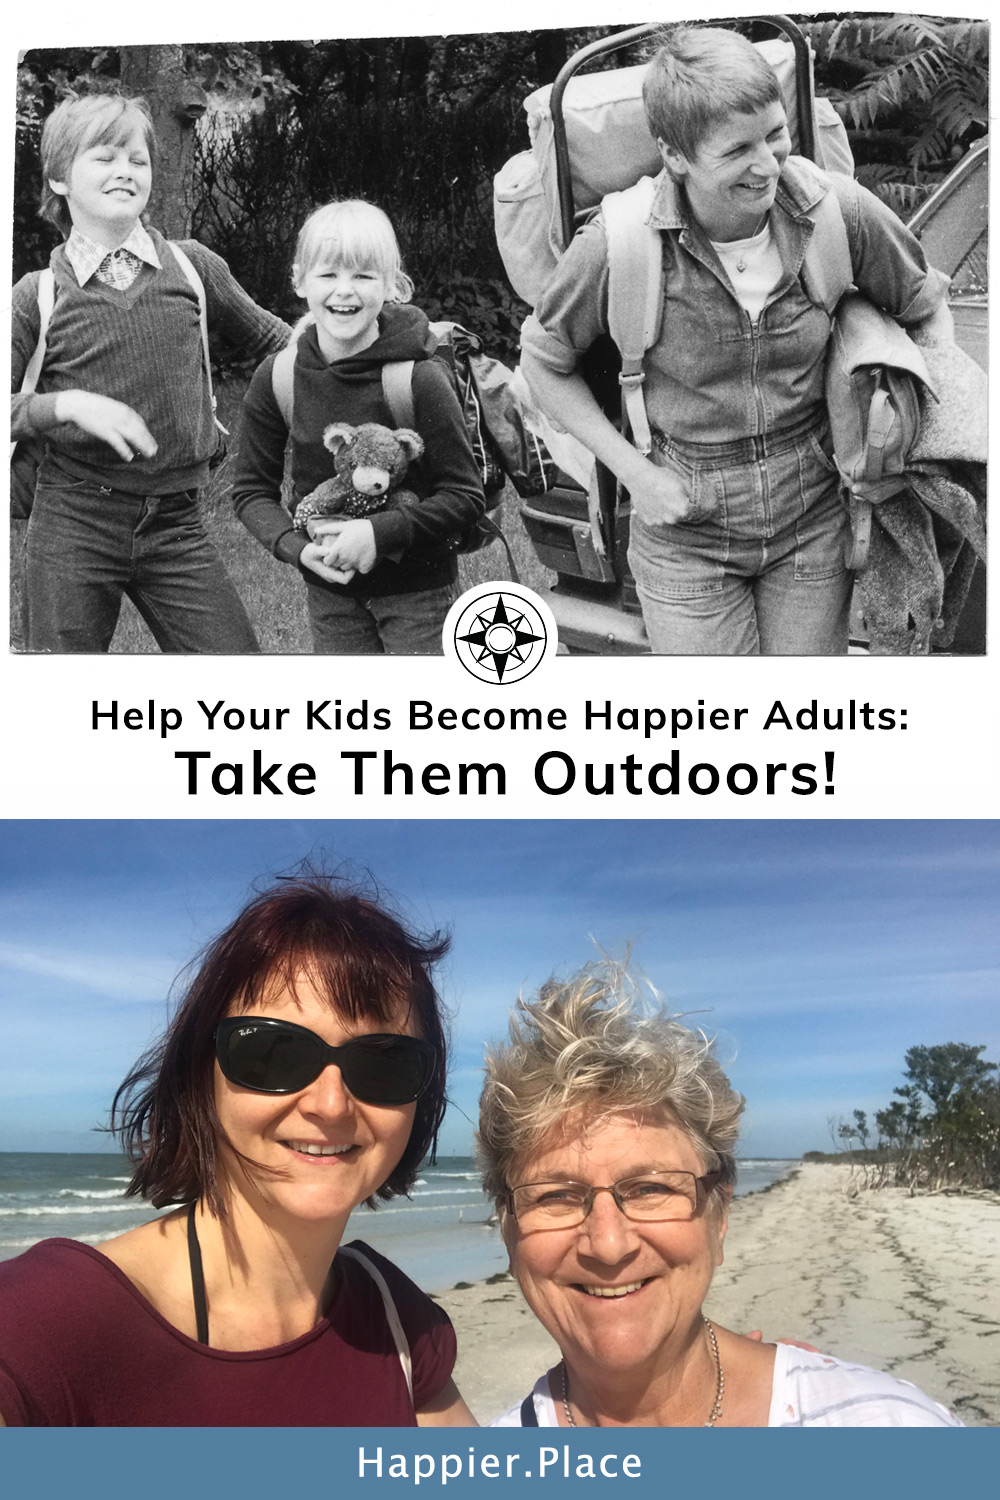 Help your kids become happier adults: take them outdoors! Outdoor fun makes families happier and healthier for generations. #HappierPlace #nature #parenting #outdoors